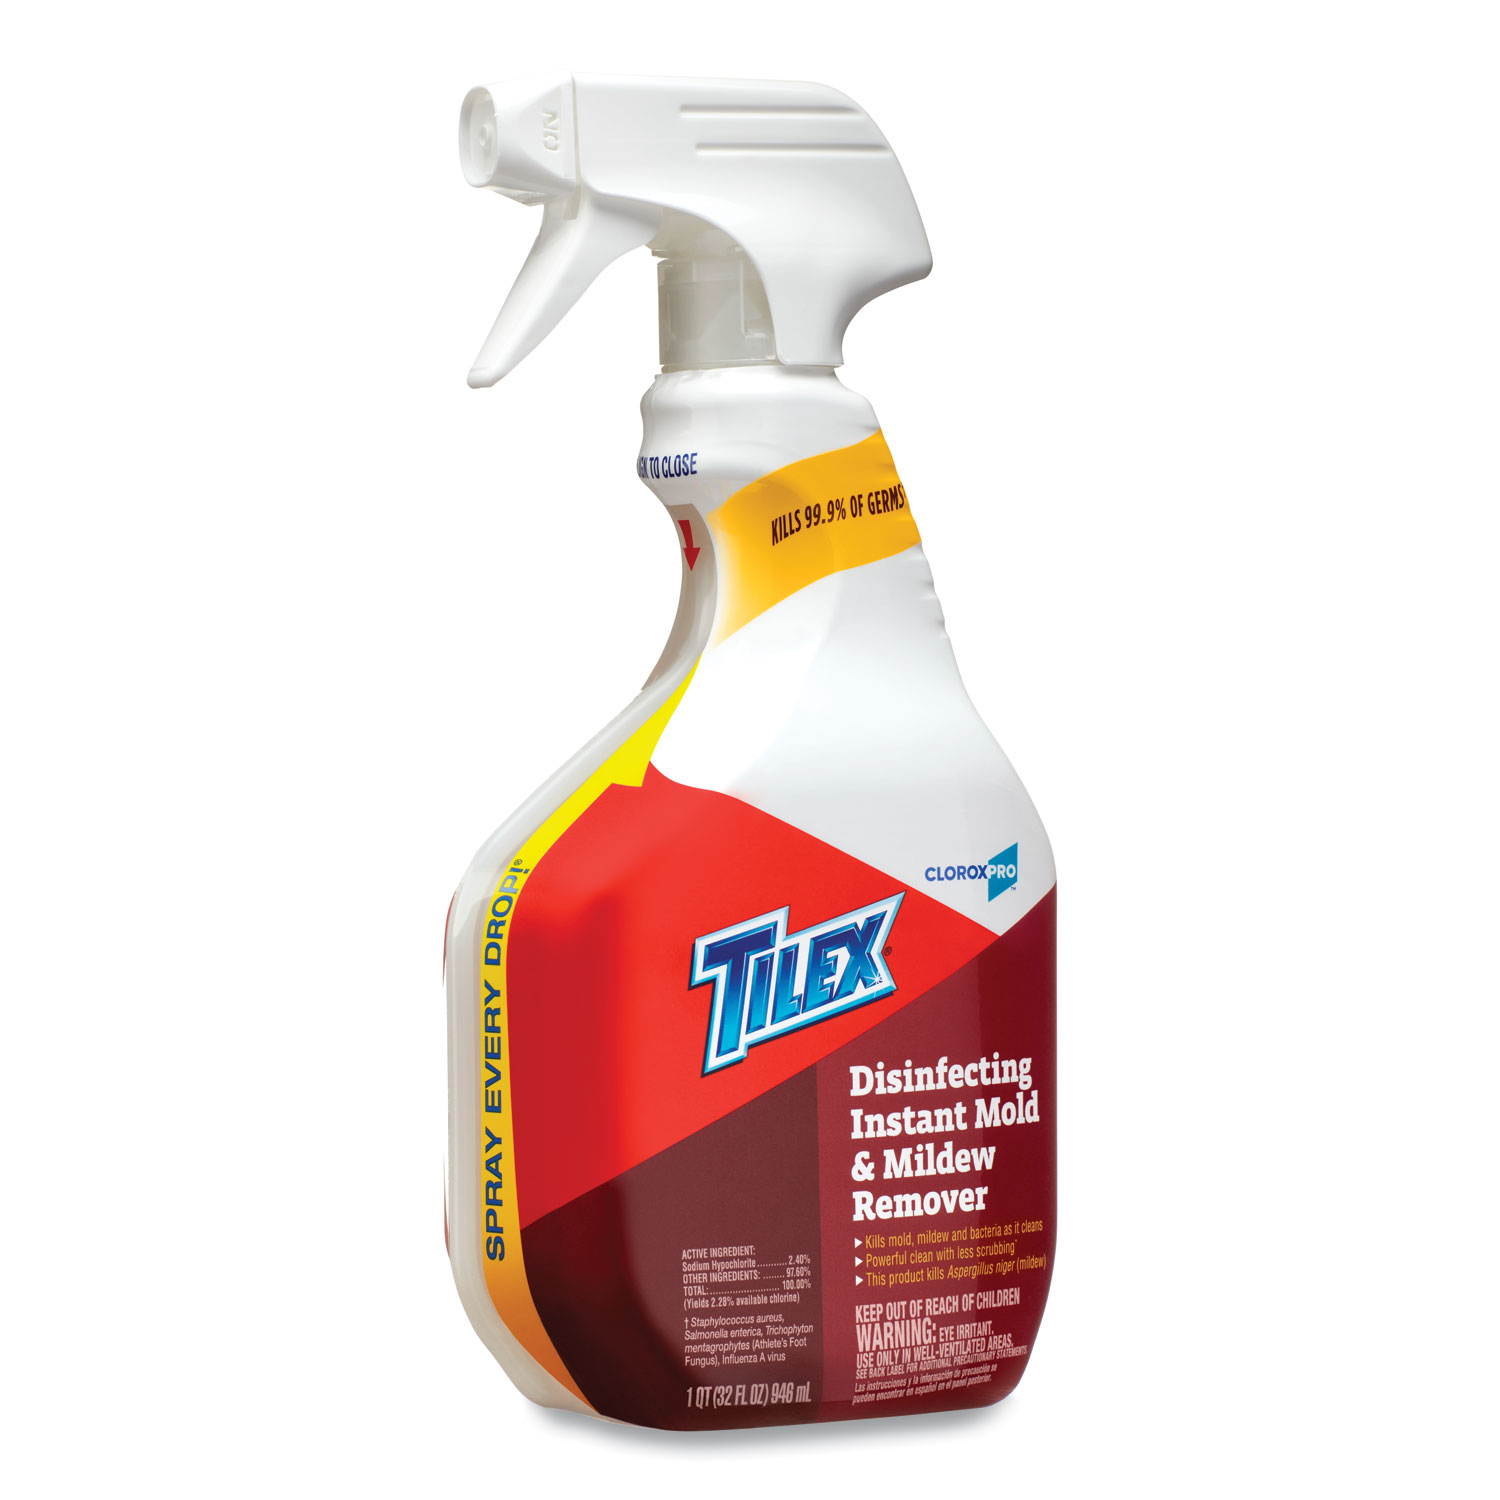 Tilex Disinfects Instant Mildew Remover, 32 Oz., Bathroom Cleaners, Cleaning Chemicals, Chemicals, Housekeeping and Janitorial, Open Catalog